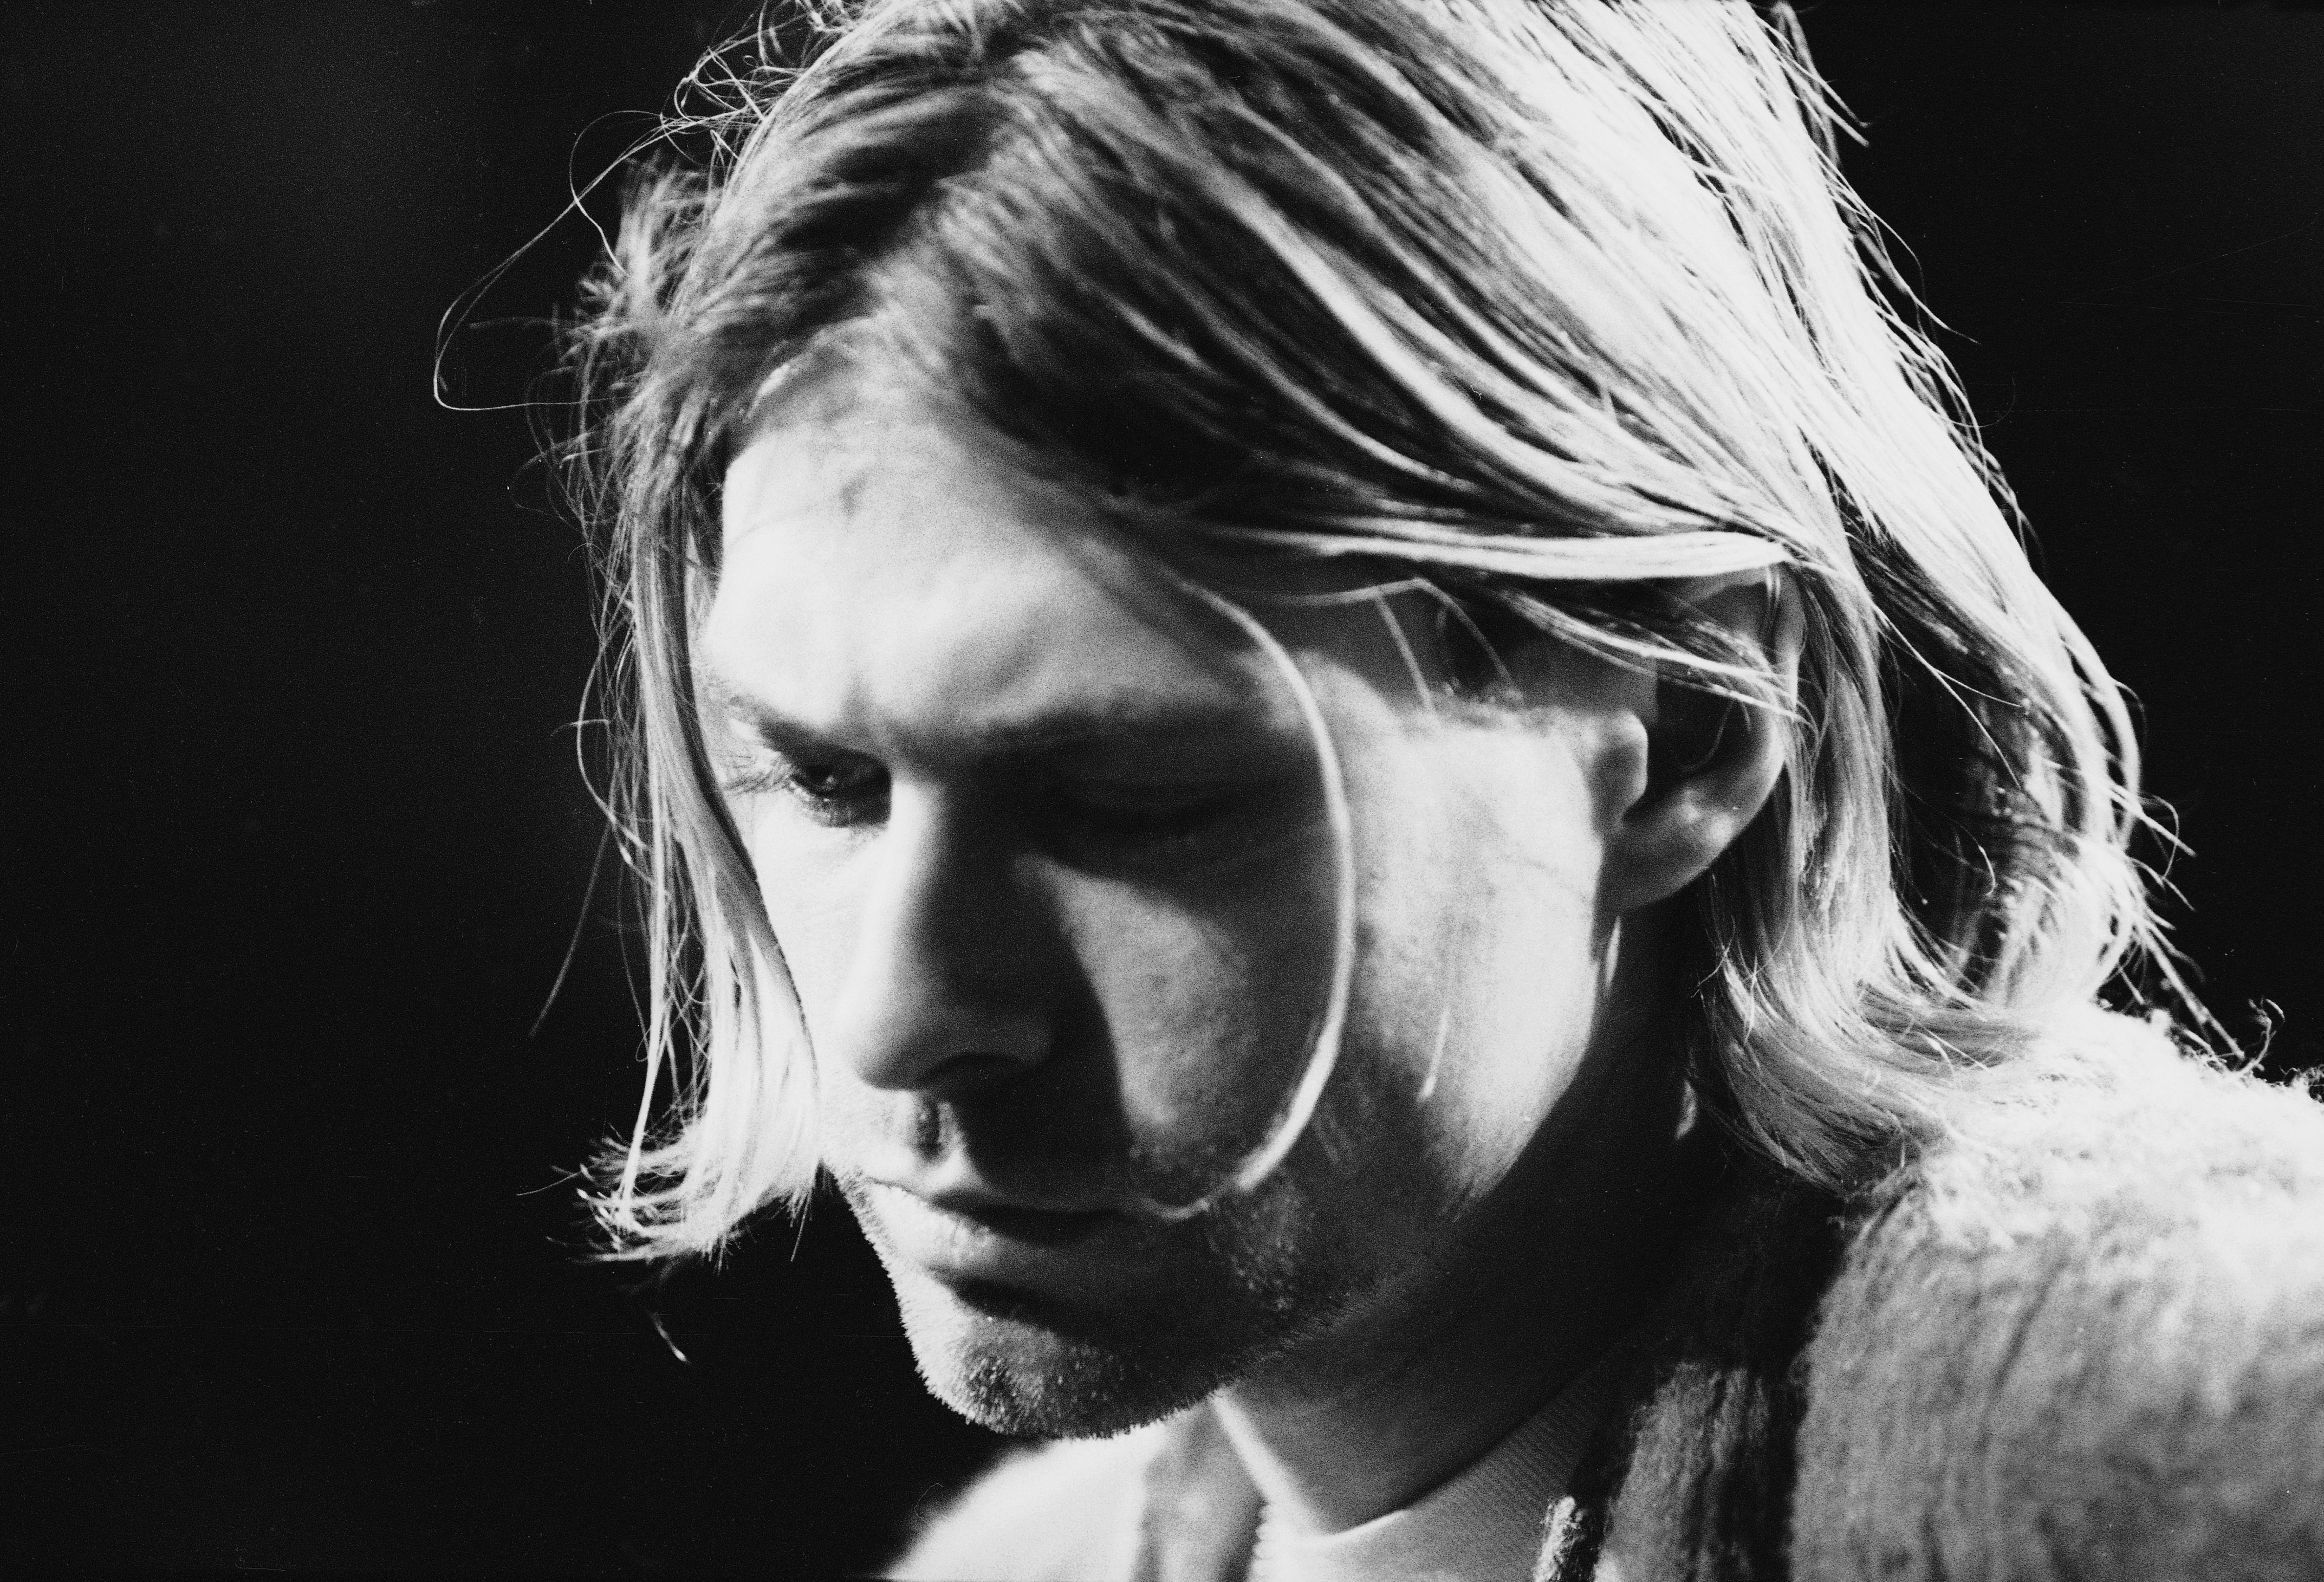 Kurt Cobain Biographer: I Changed My Mind—Let's Leave the Legend Alone | Time